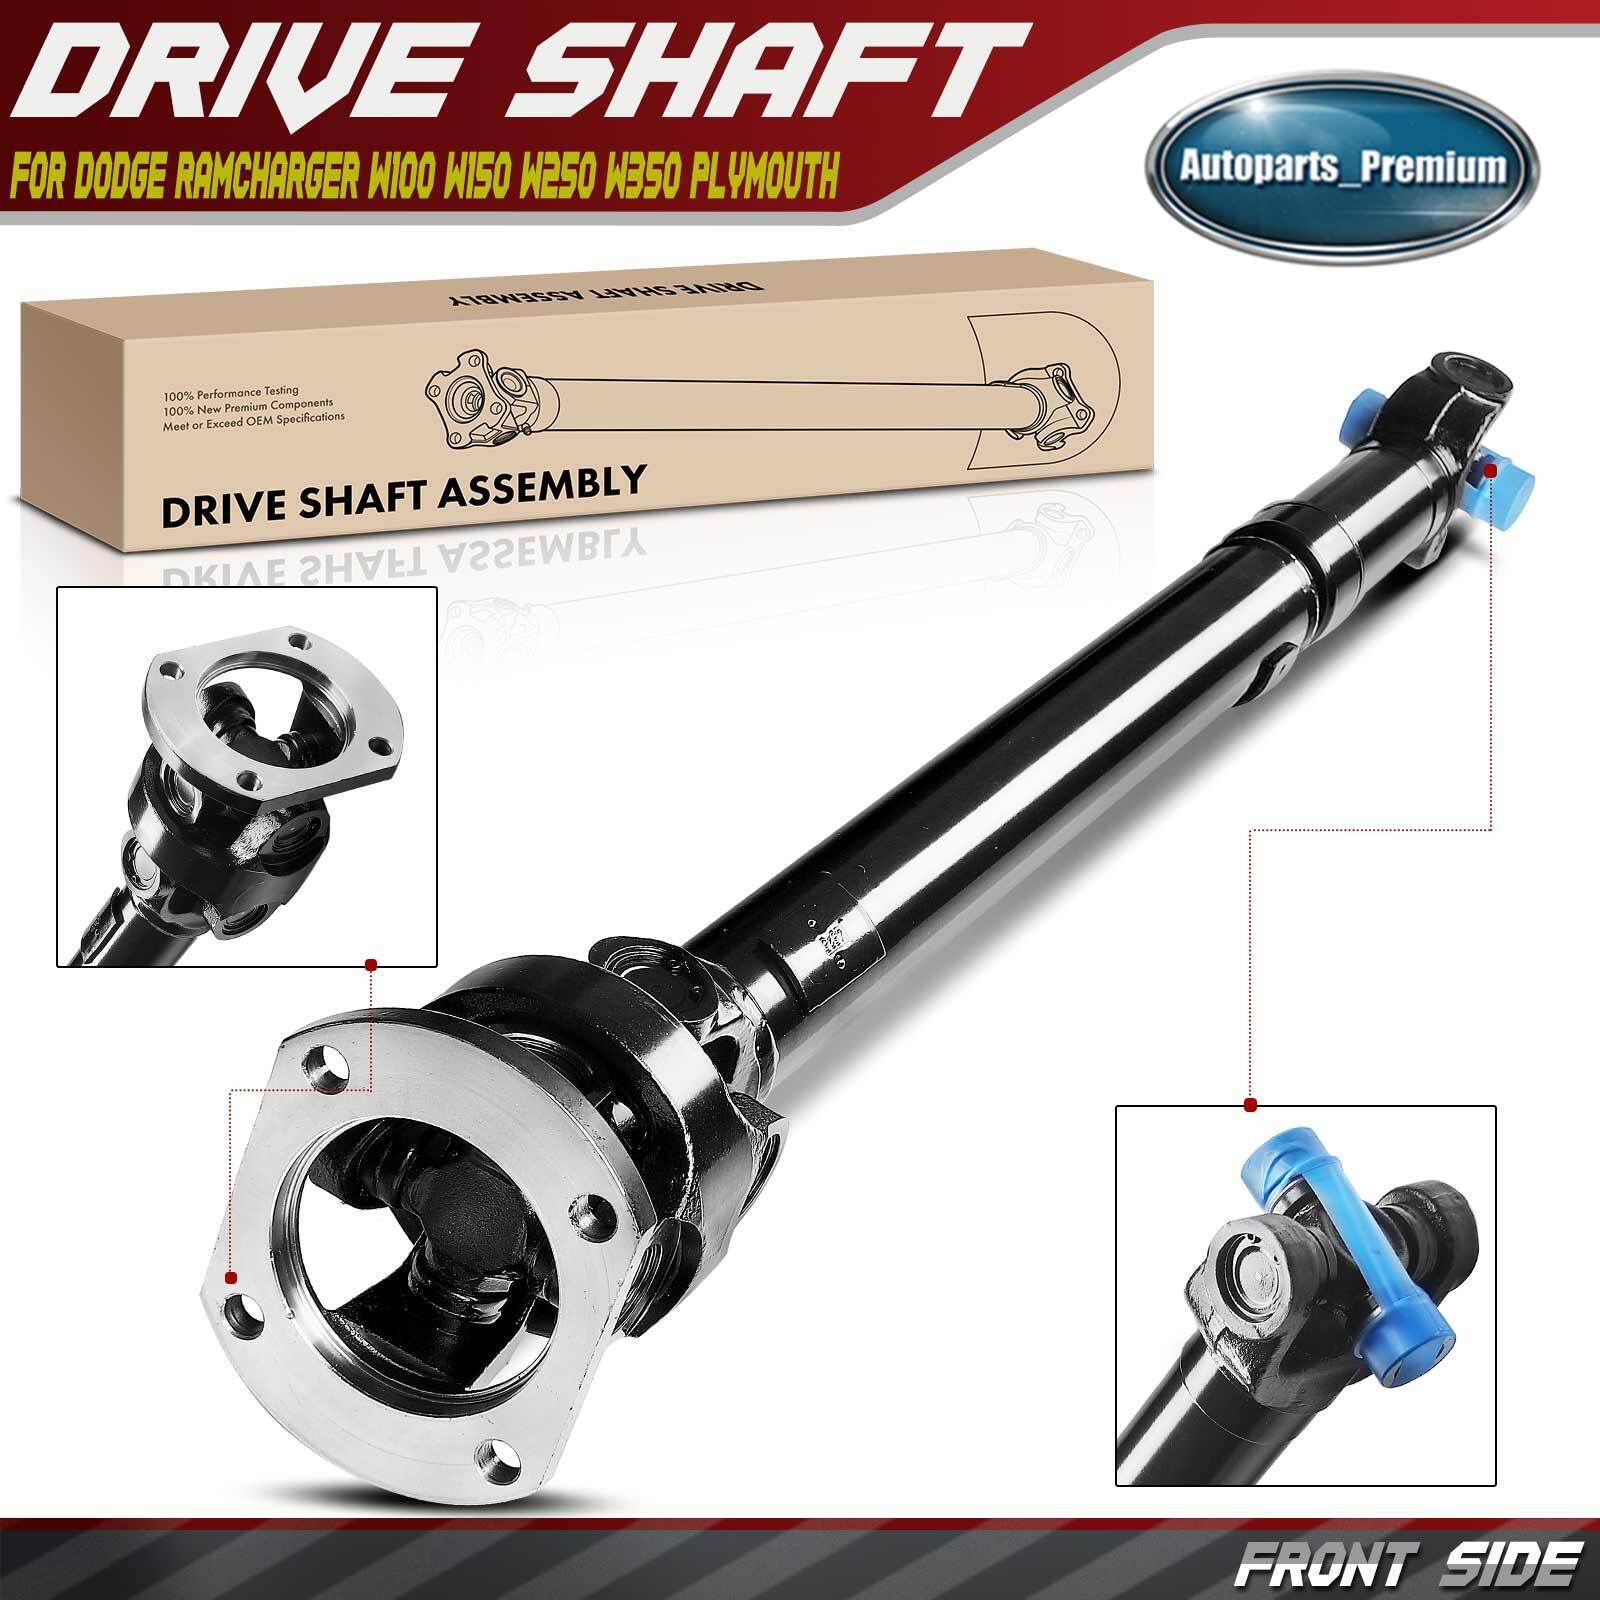 Front Driveshaft Prop Shaft Assembly for Dodge Ramcharger 87-93 W100 W150 Auto